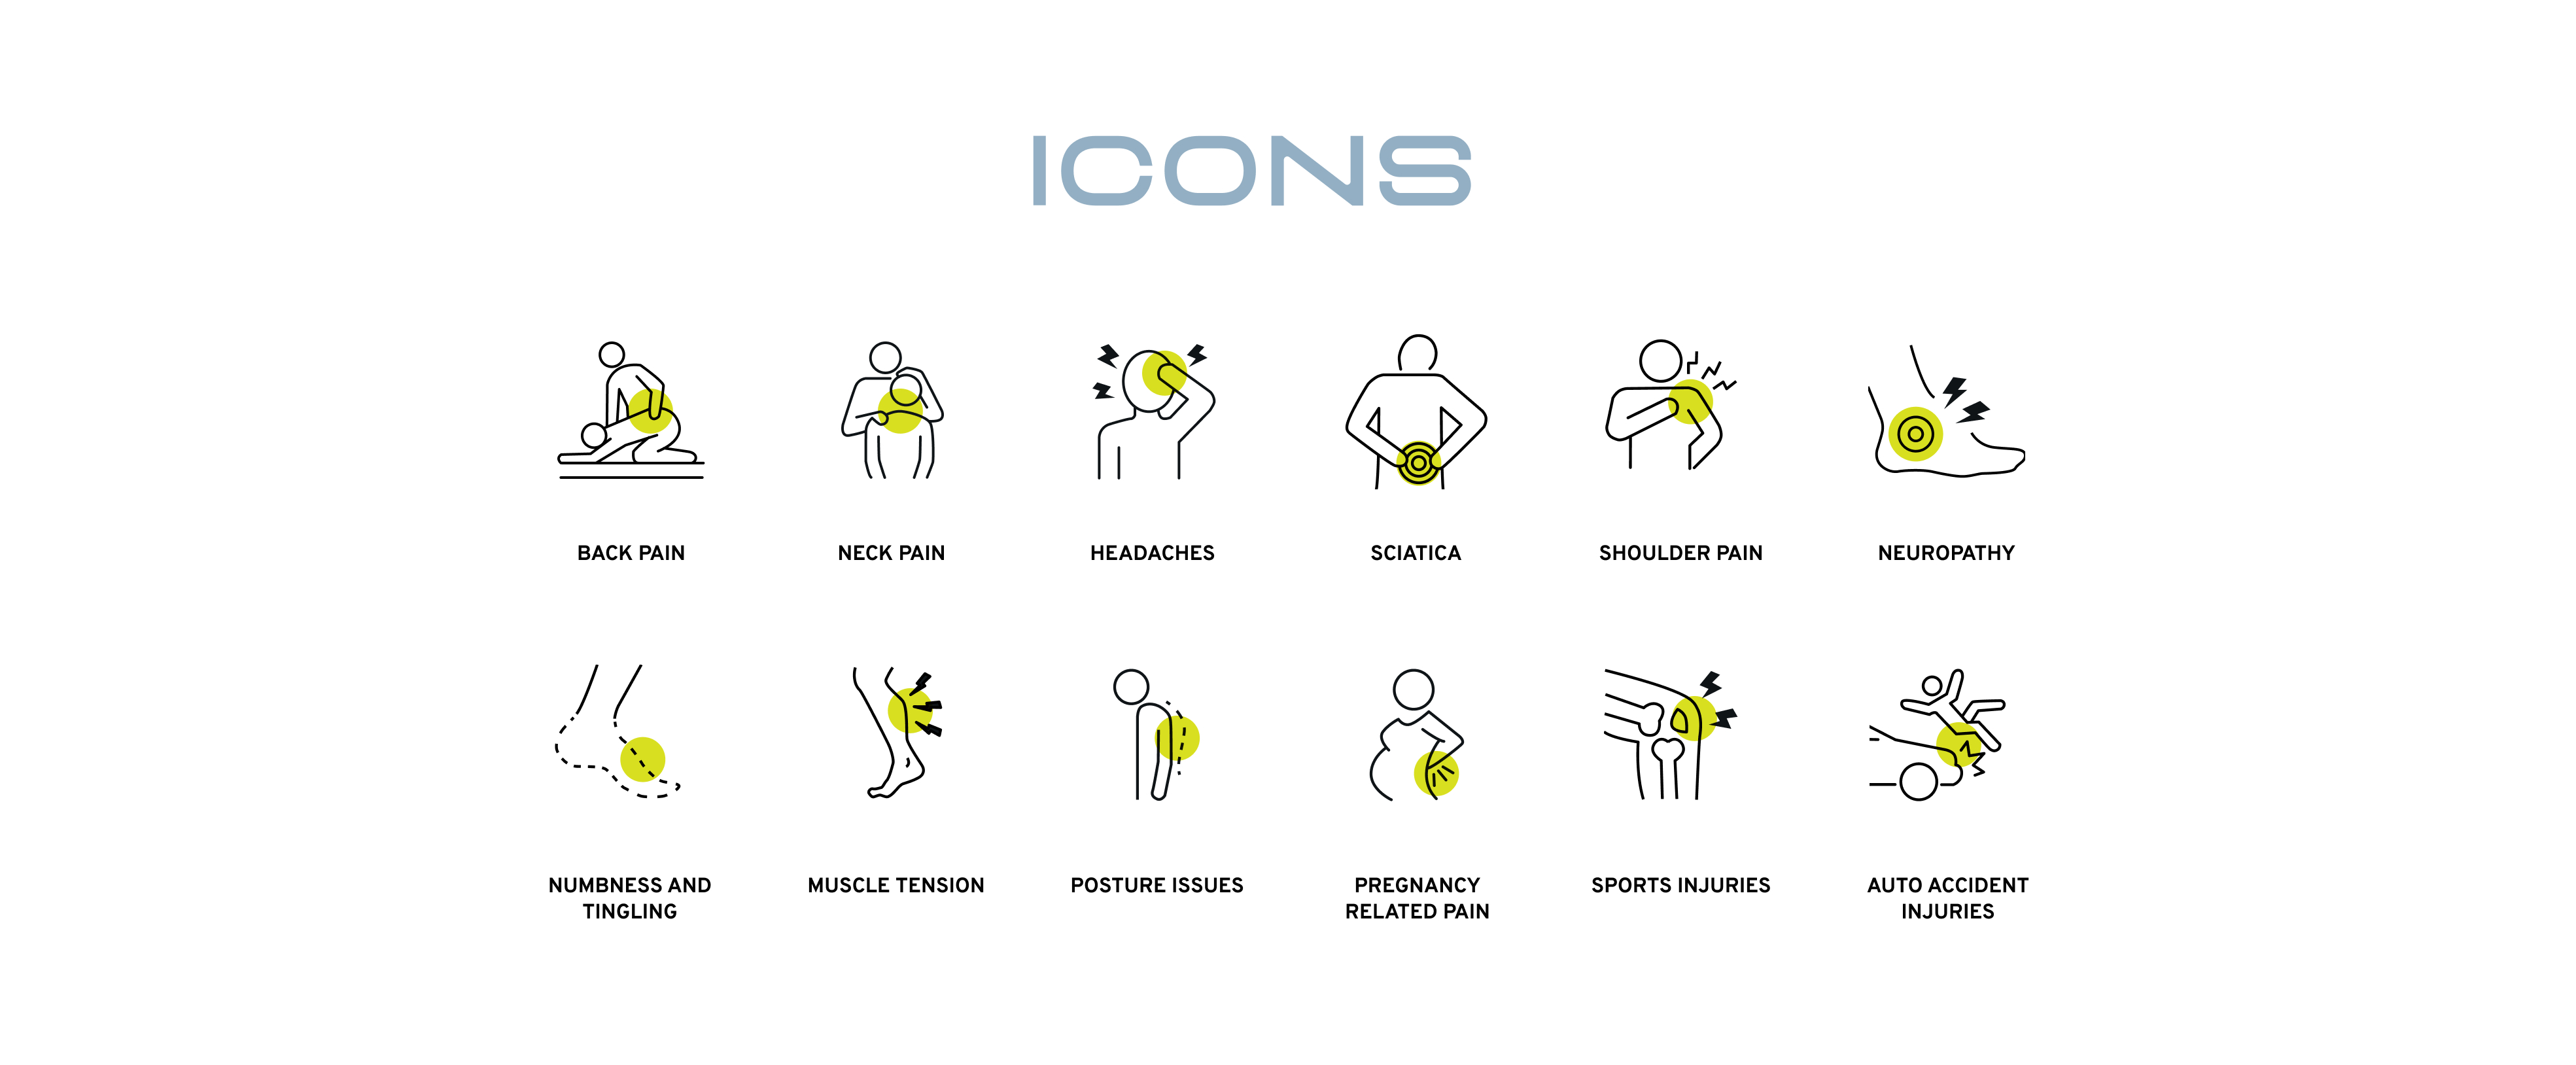 re_icons